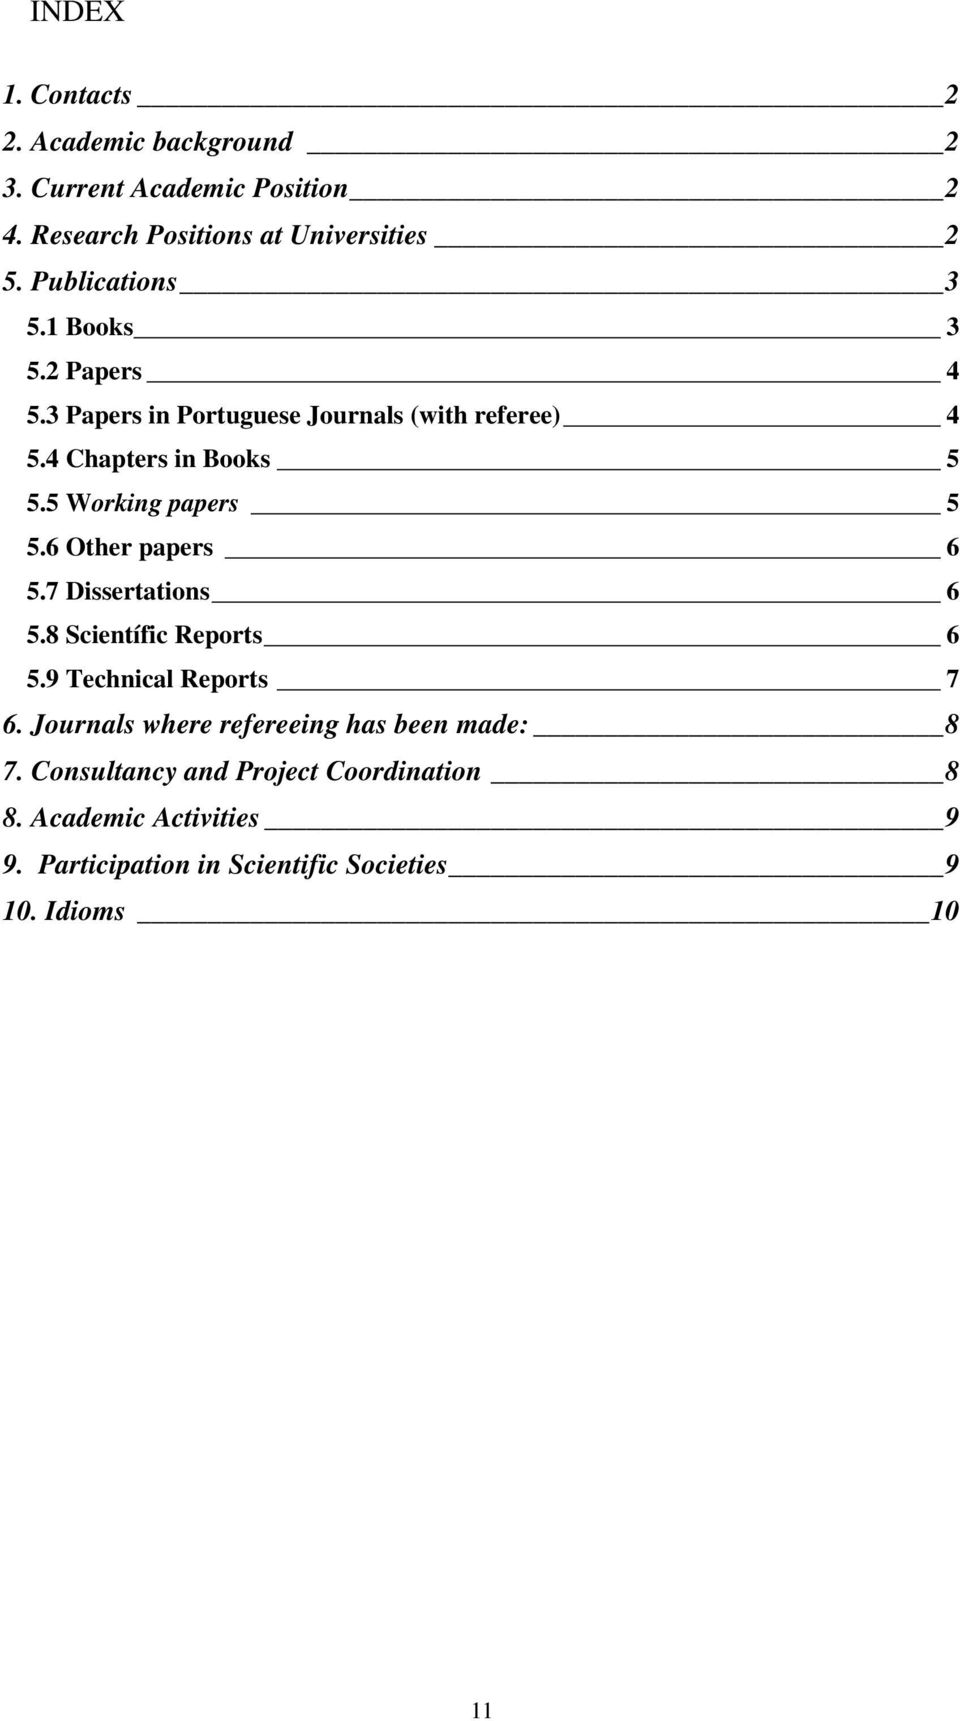 5 Working papers 5 5.6 Other papers 6 5.7 Dissertations 6 5.8 Scientífic Reports 6 5.9 Technical Reports 7 6.